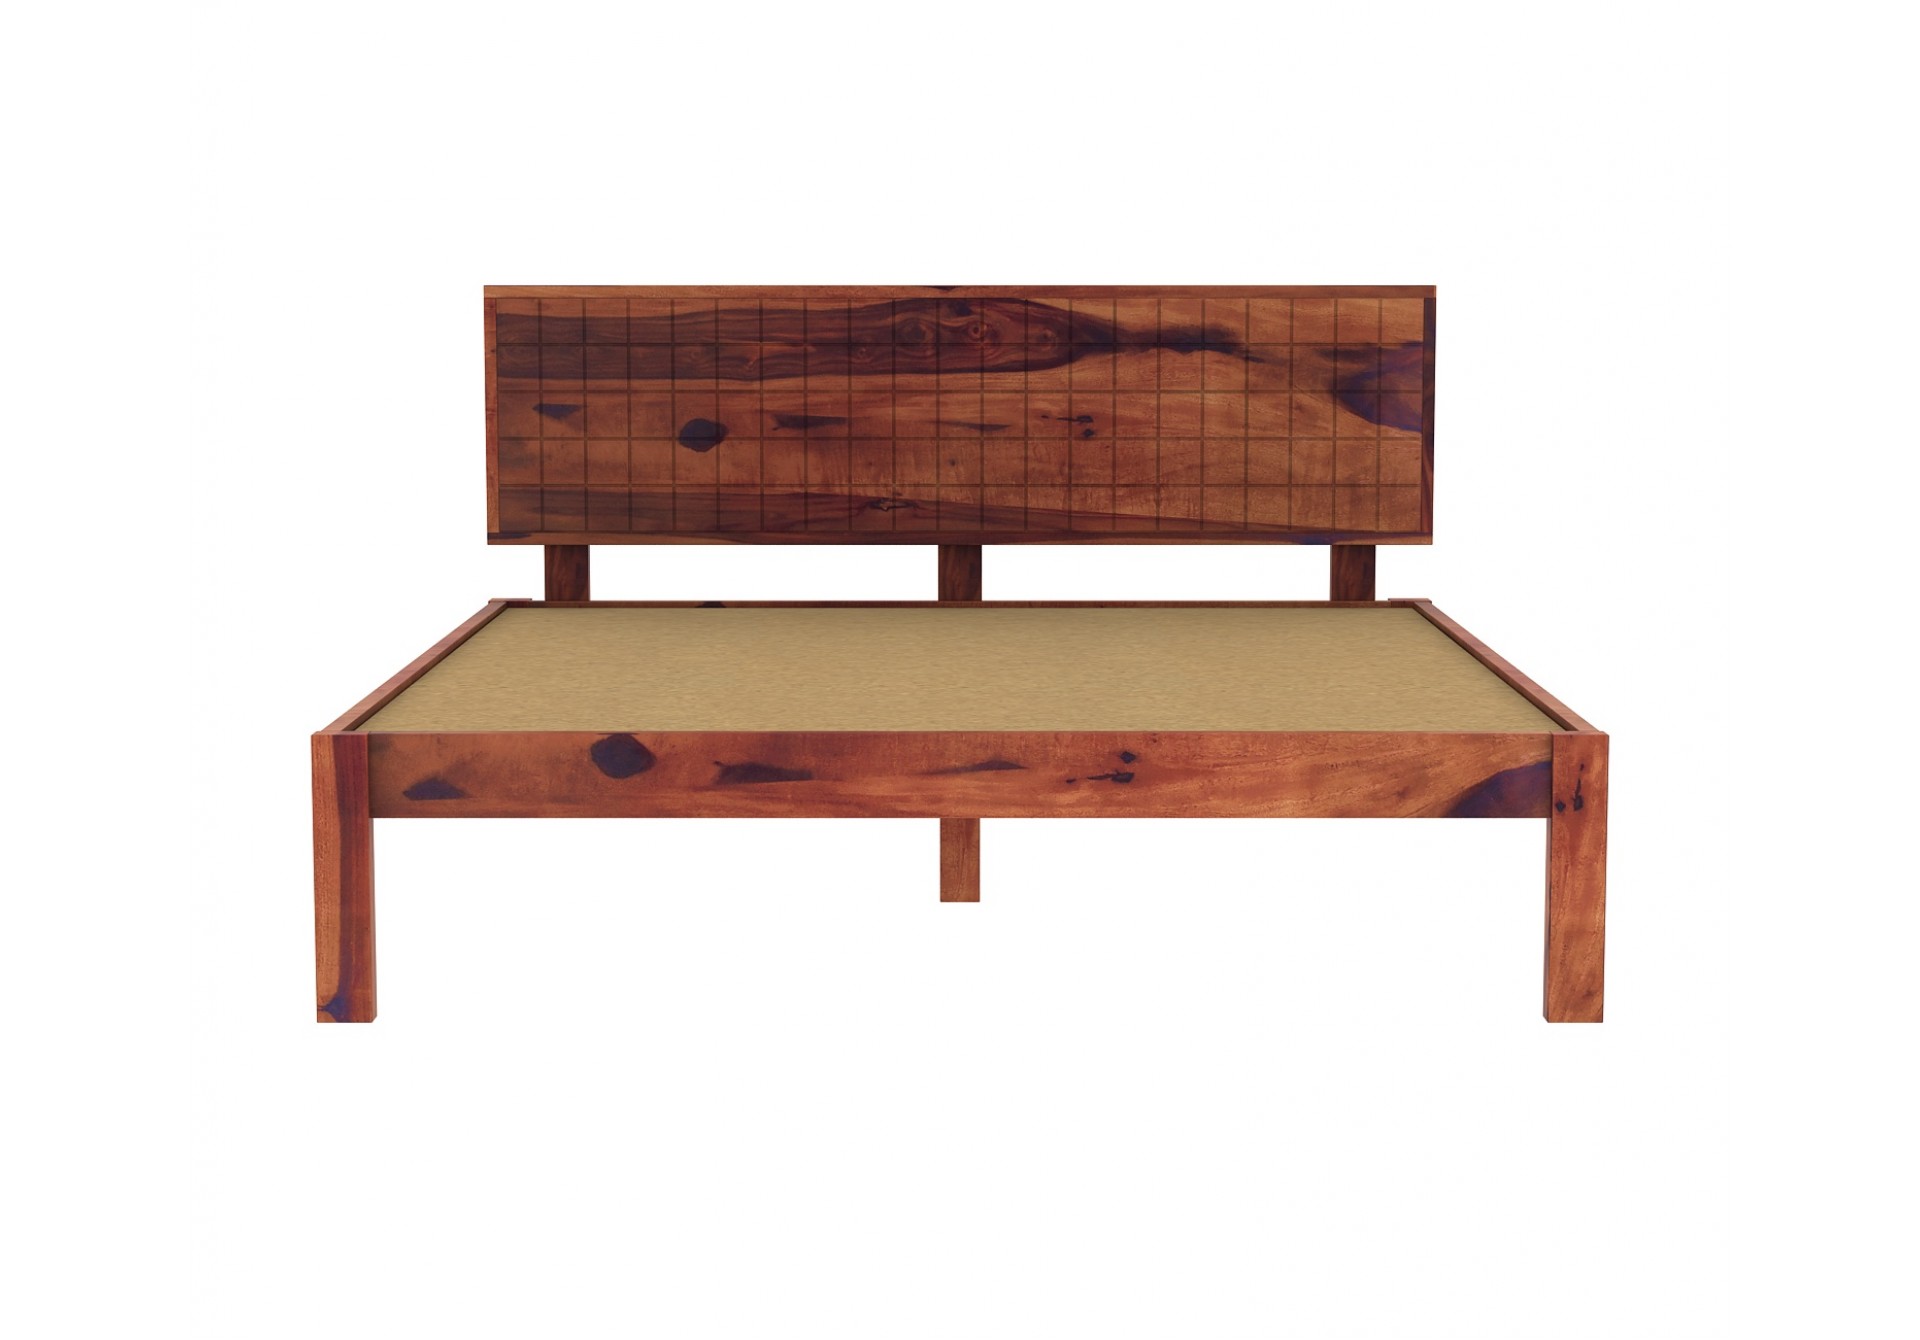 Solic Wooden Bed Without storage King Size (Teak Finish)